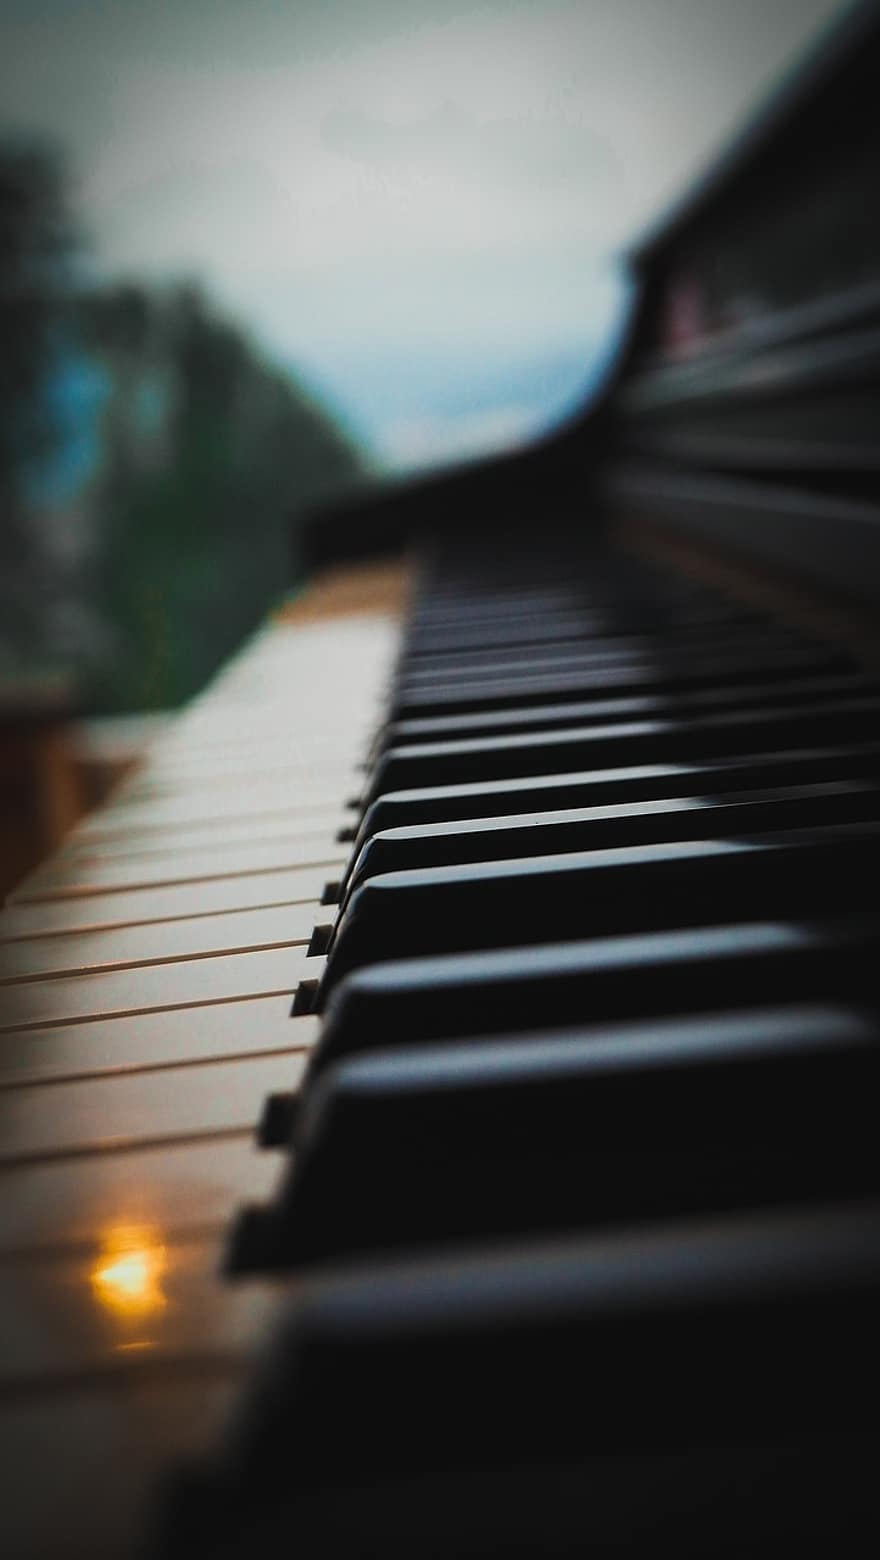 Piano, Nature, Close Up, Music, musical instrument, piano key, musician, close-up, learning, practicing, key